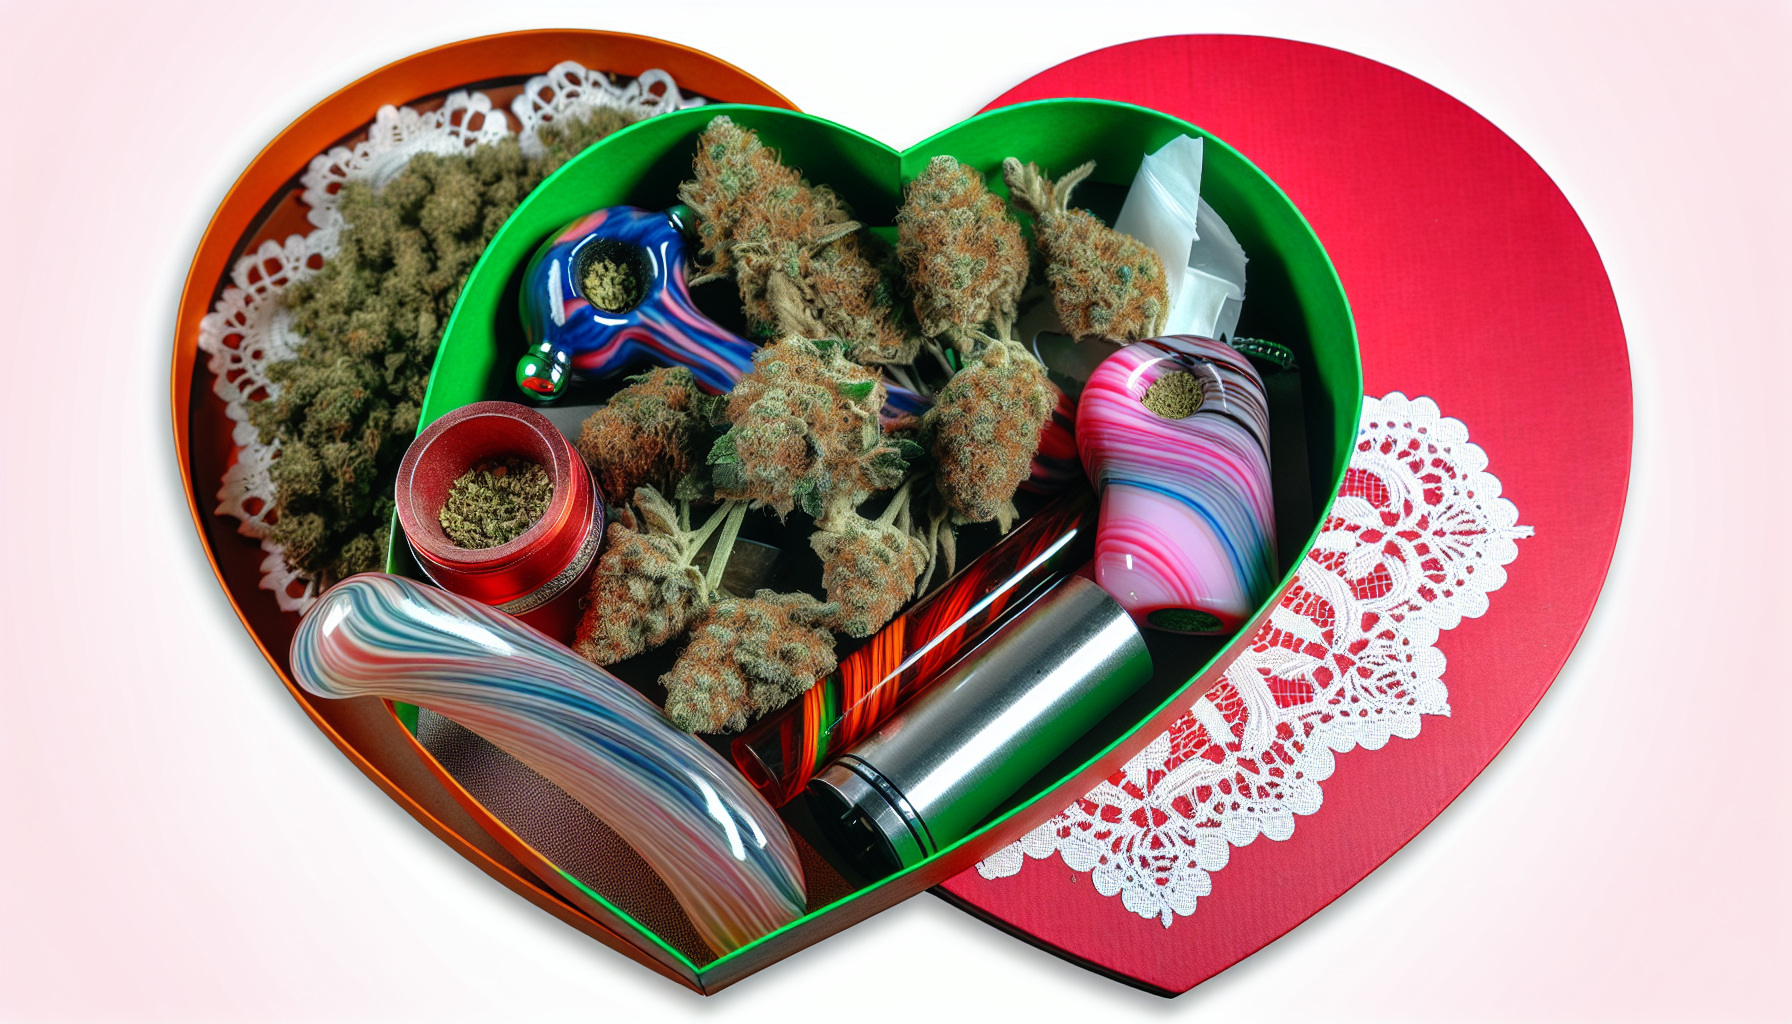 A heart-shaped box filled with cannabis-themed Valentine's Day gifts